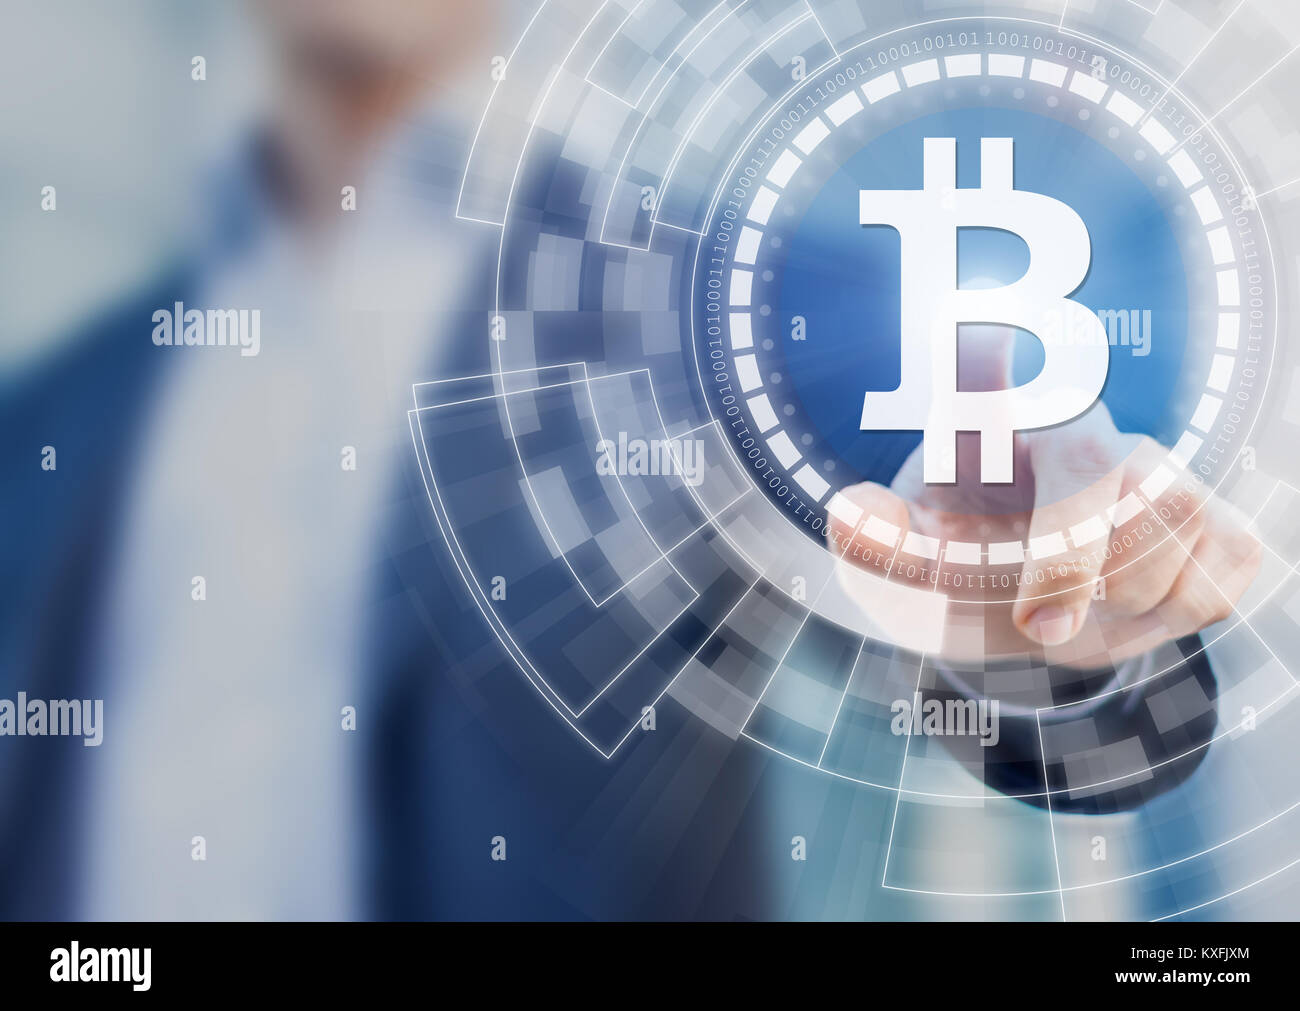 Businessman using bitcoin digital wallet blockchain technology for financial investment or payment solution, BTC cryptocurrency symbol on virtual scre Stock Photo